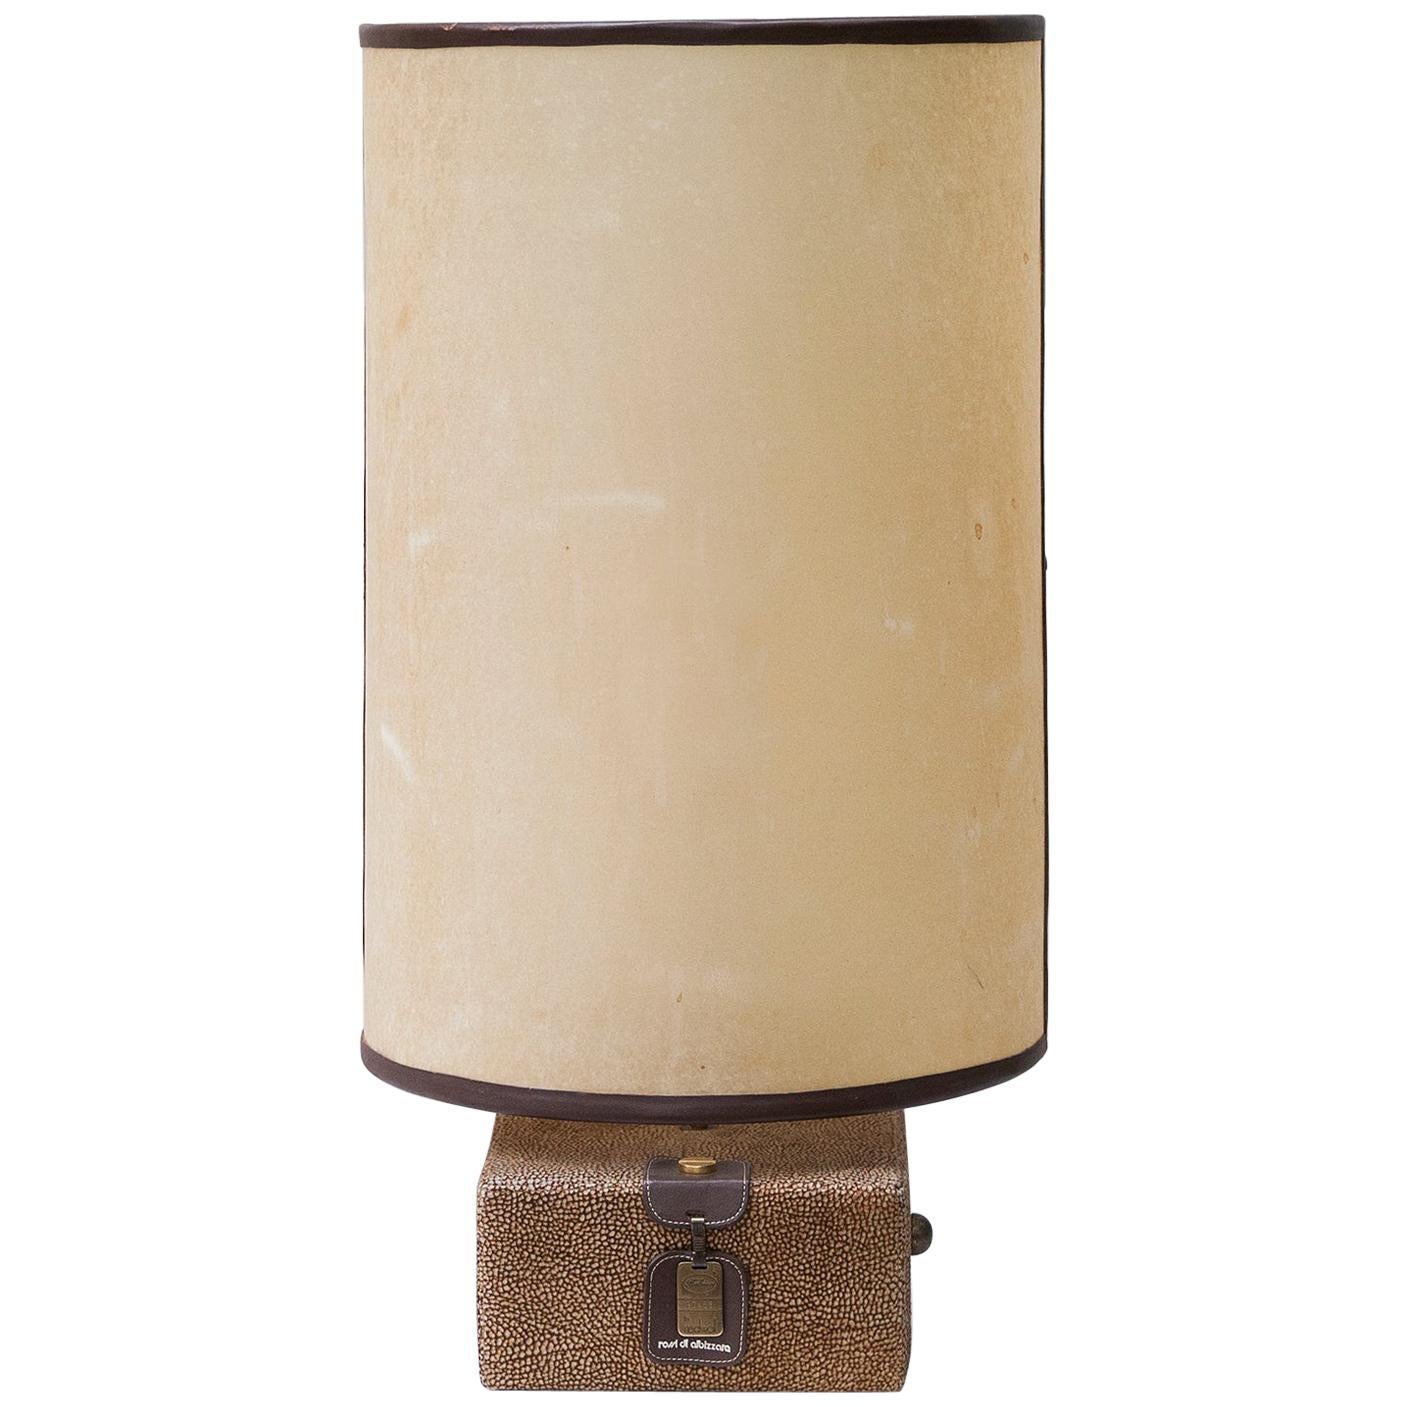 Carlo Bartoli Suede Leather Table Lamp by Borbonese, Italy, 1980 For Sale